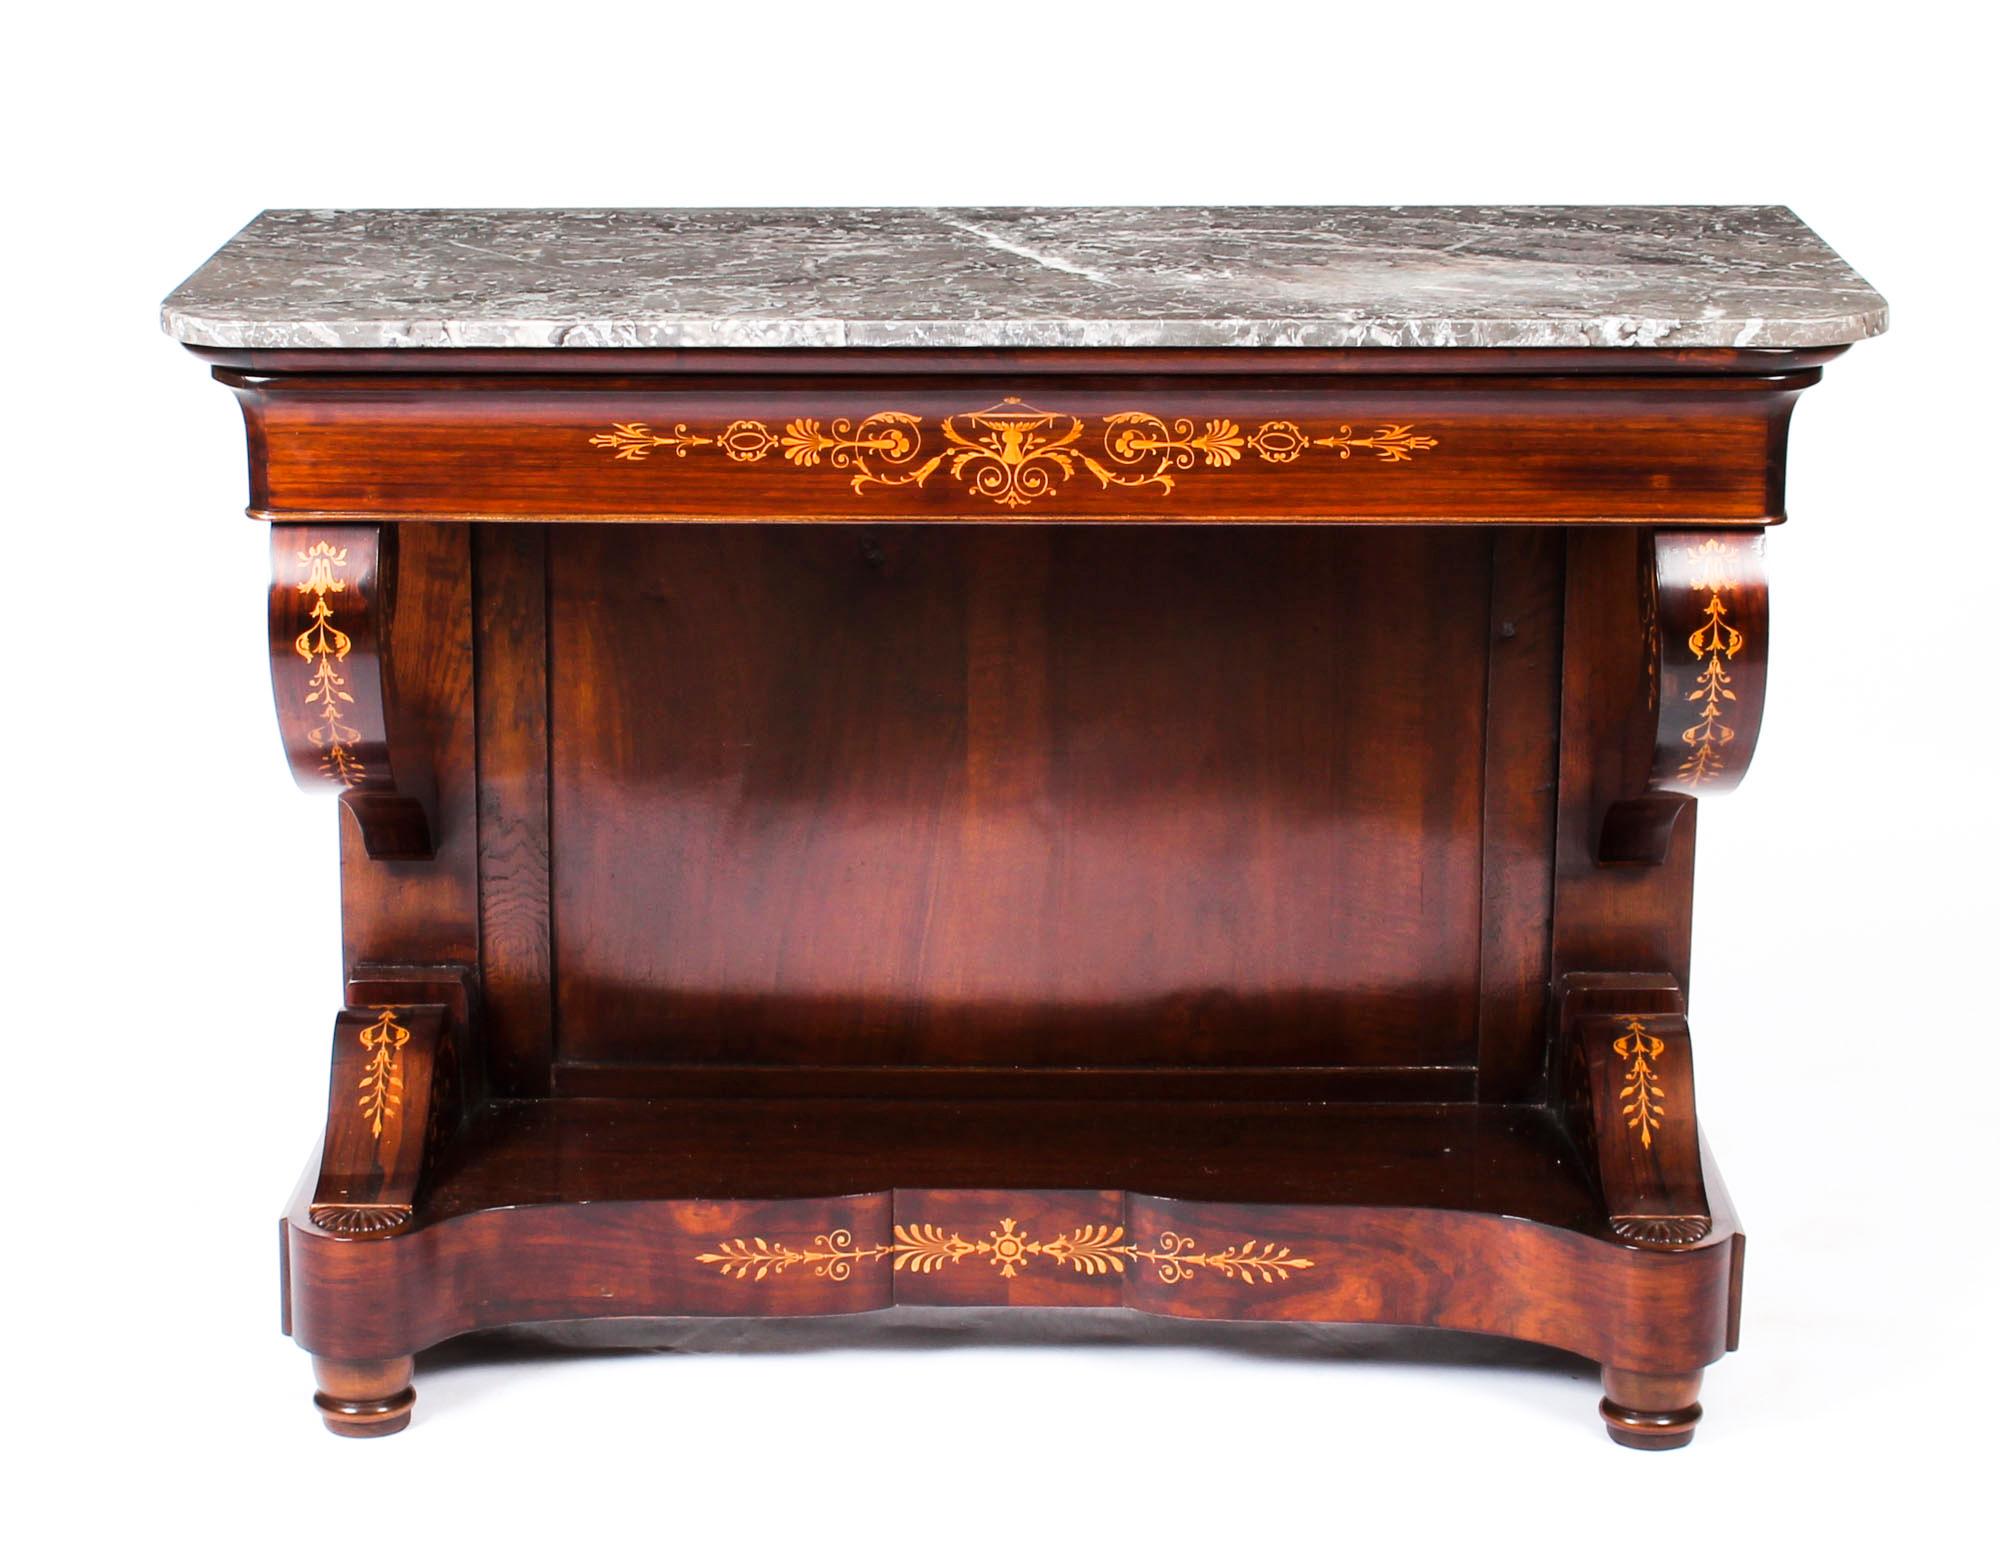 This is a very elegant antique French Charles X period finely figured tigerwood console table, circa 1830 in date.

This wonderful console table retains its original Gris St Anne marble top has a useful frieze drawer and stands on curvaceous